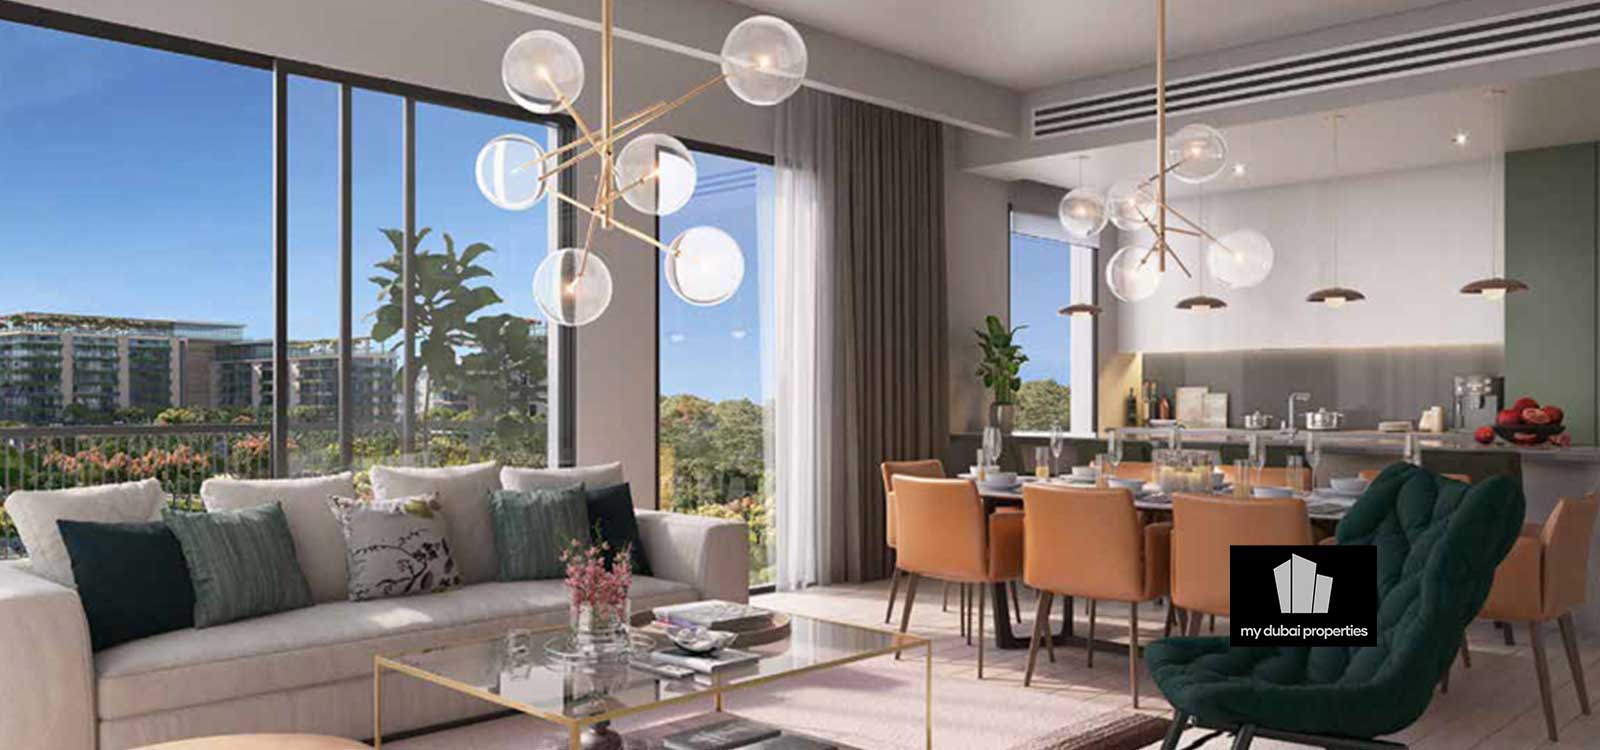 Central Park 1 to 4 Bedroom Apartments at City Walk